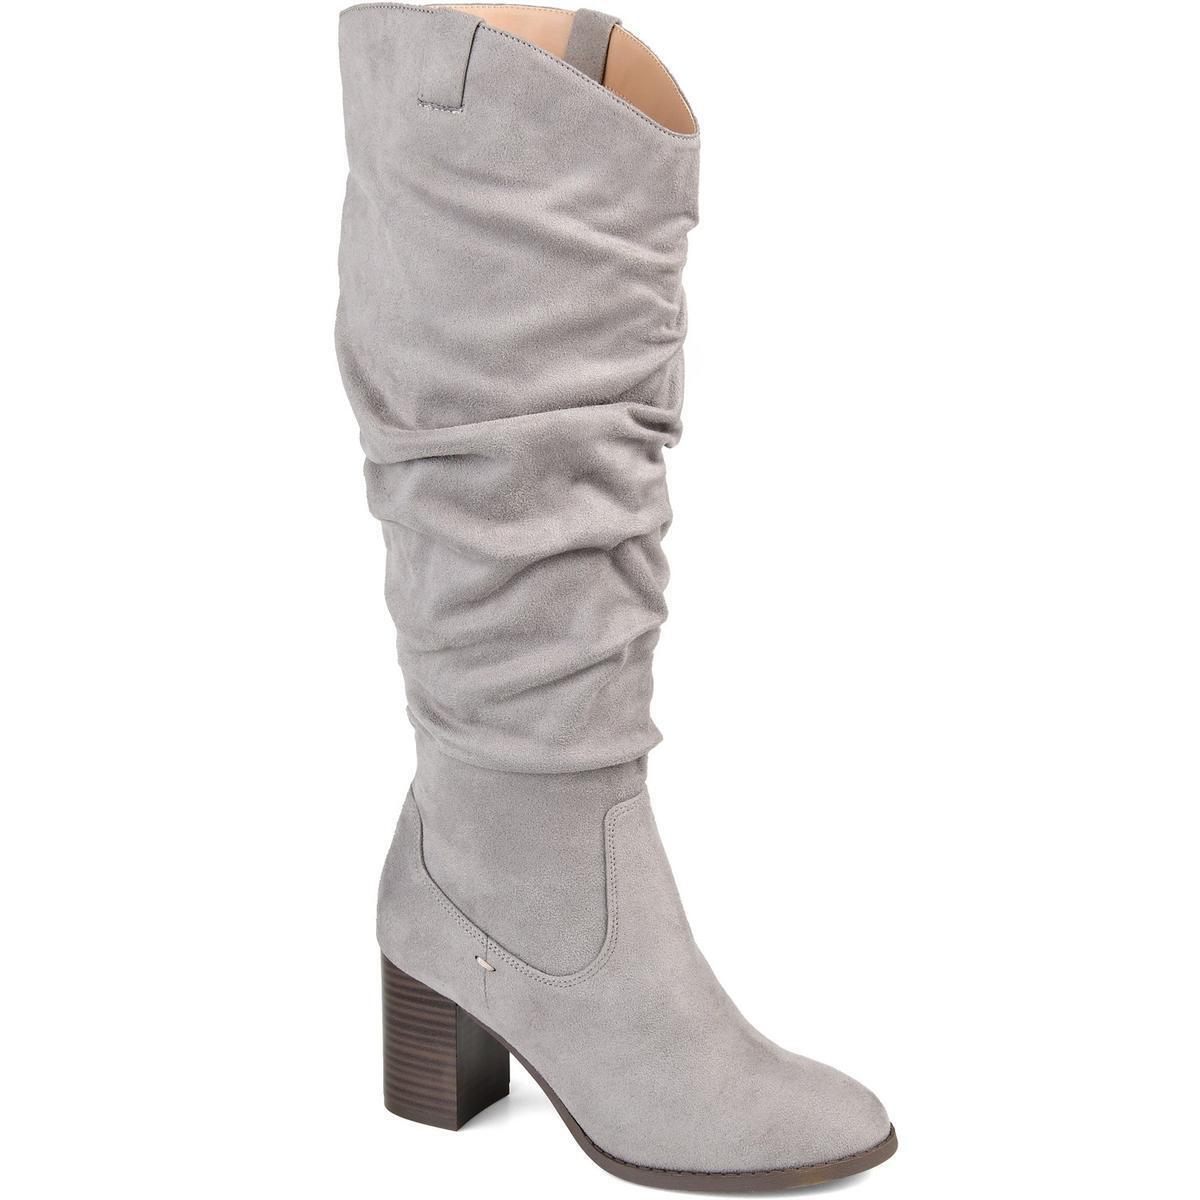 Gray Knee-High Boots